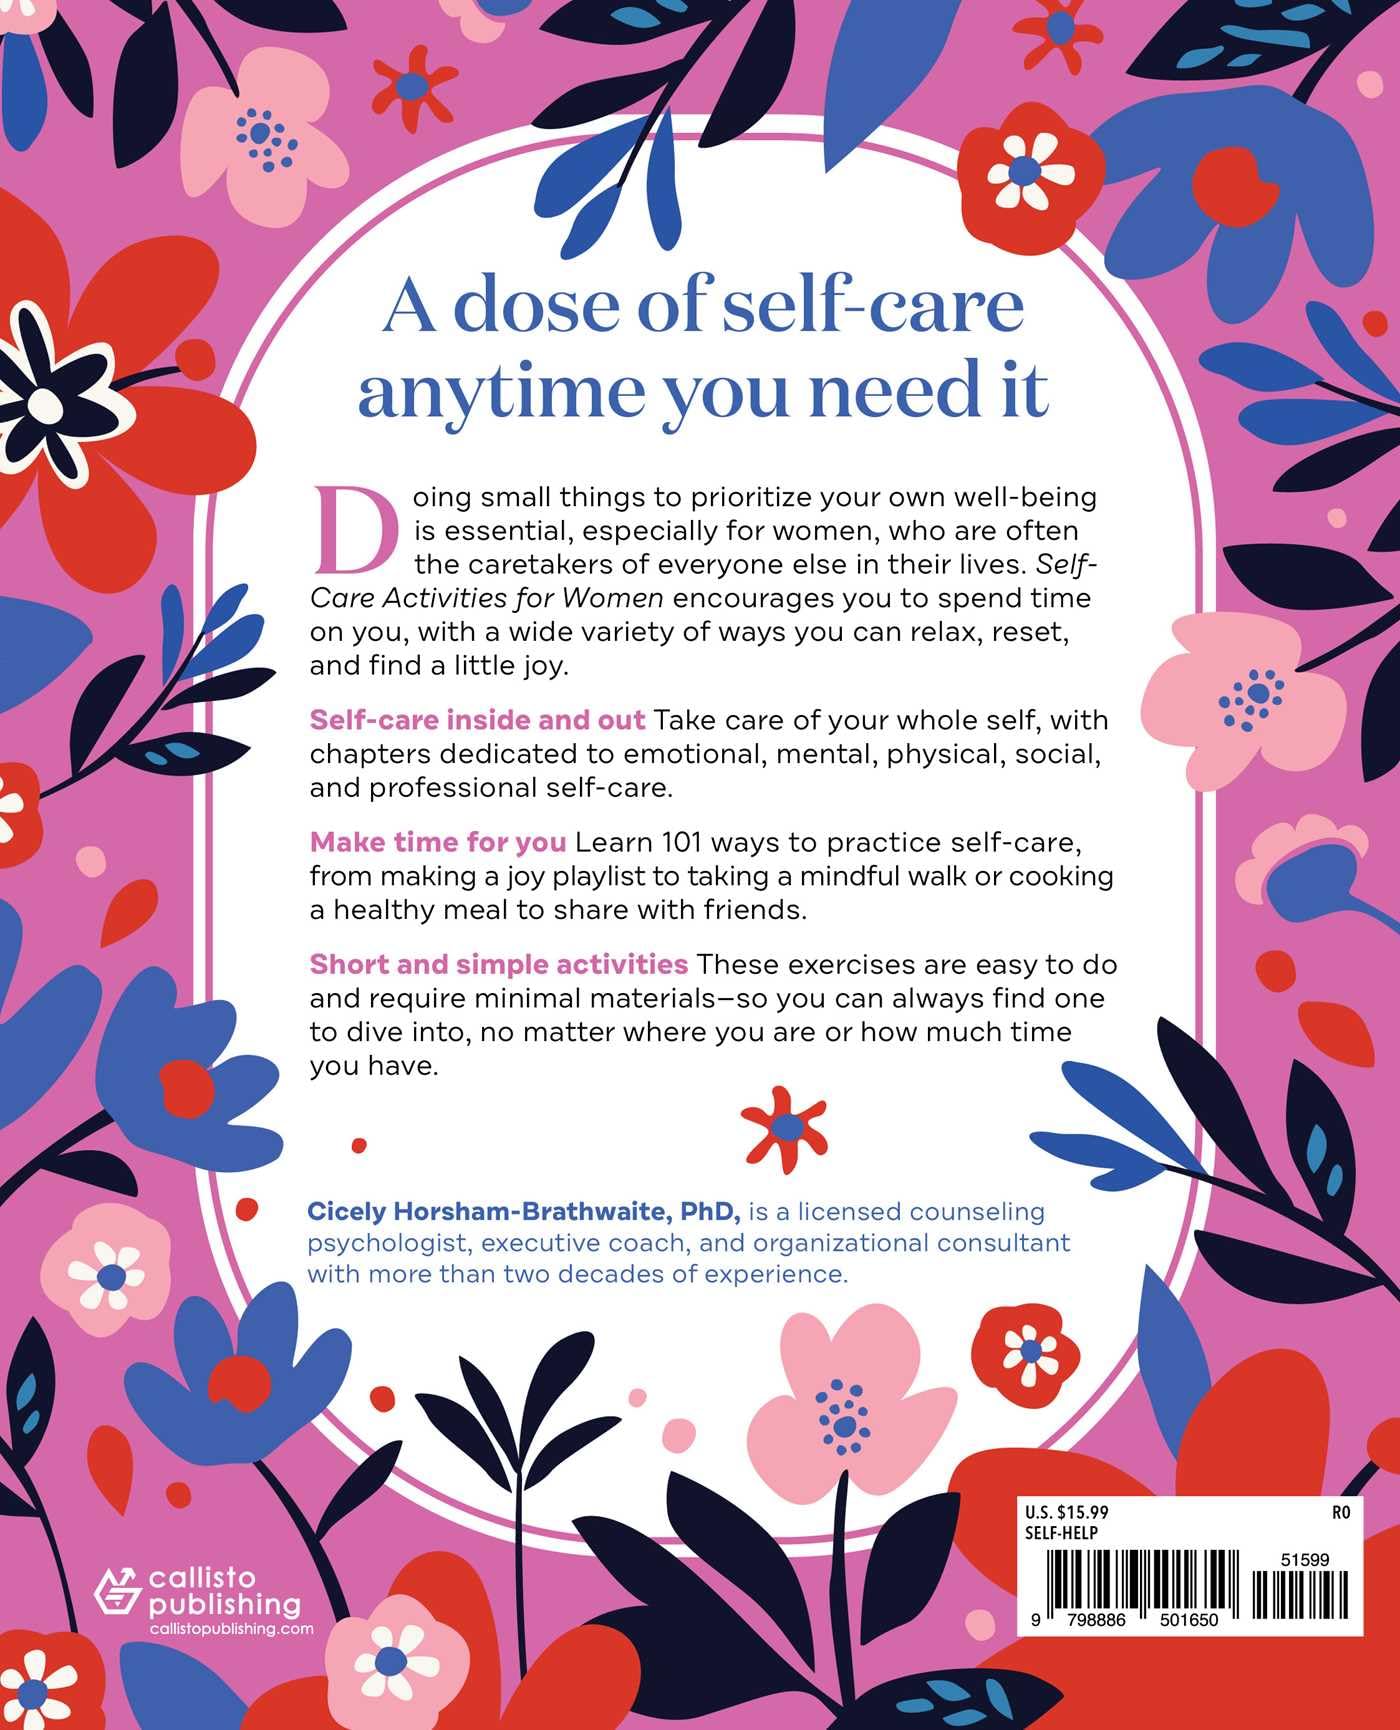 Self-Care Activities for Women: 101 Practical Ways to Slow Down and Reconnect With Yourself